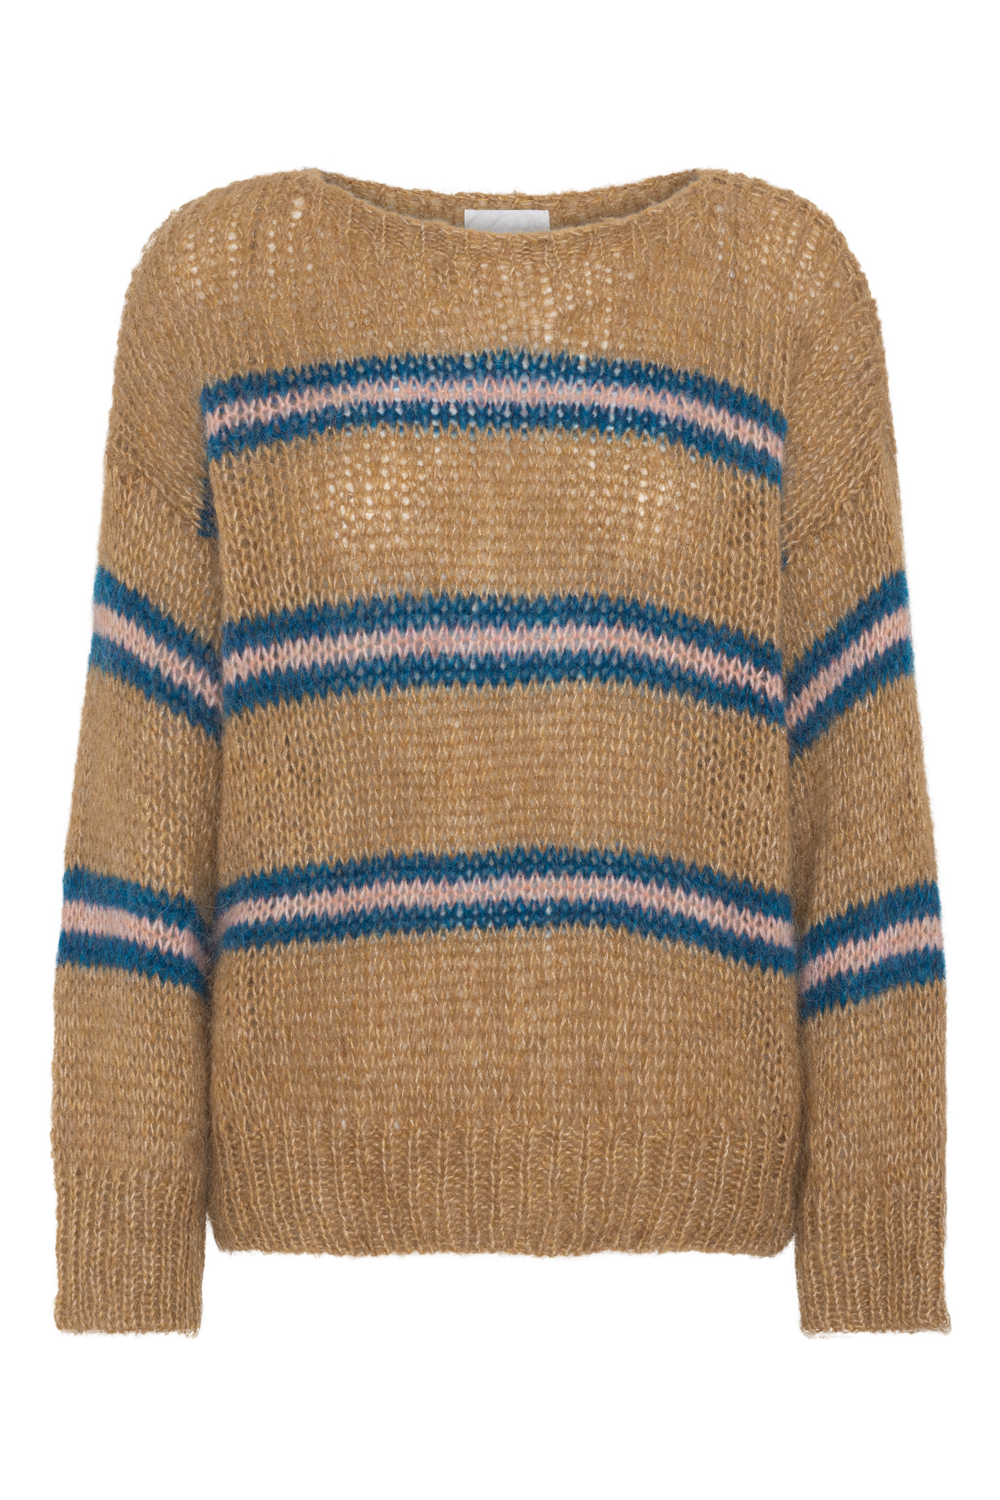 Amira Knit Pullover Brown Striped